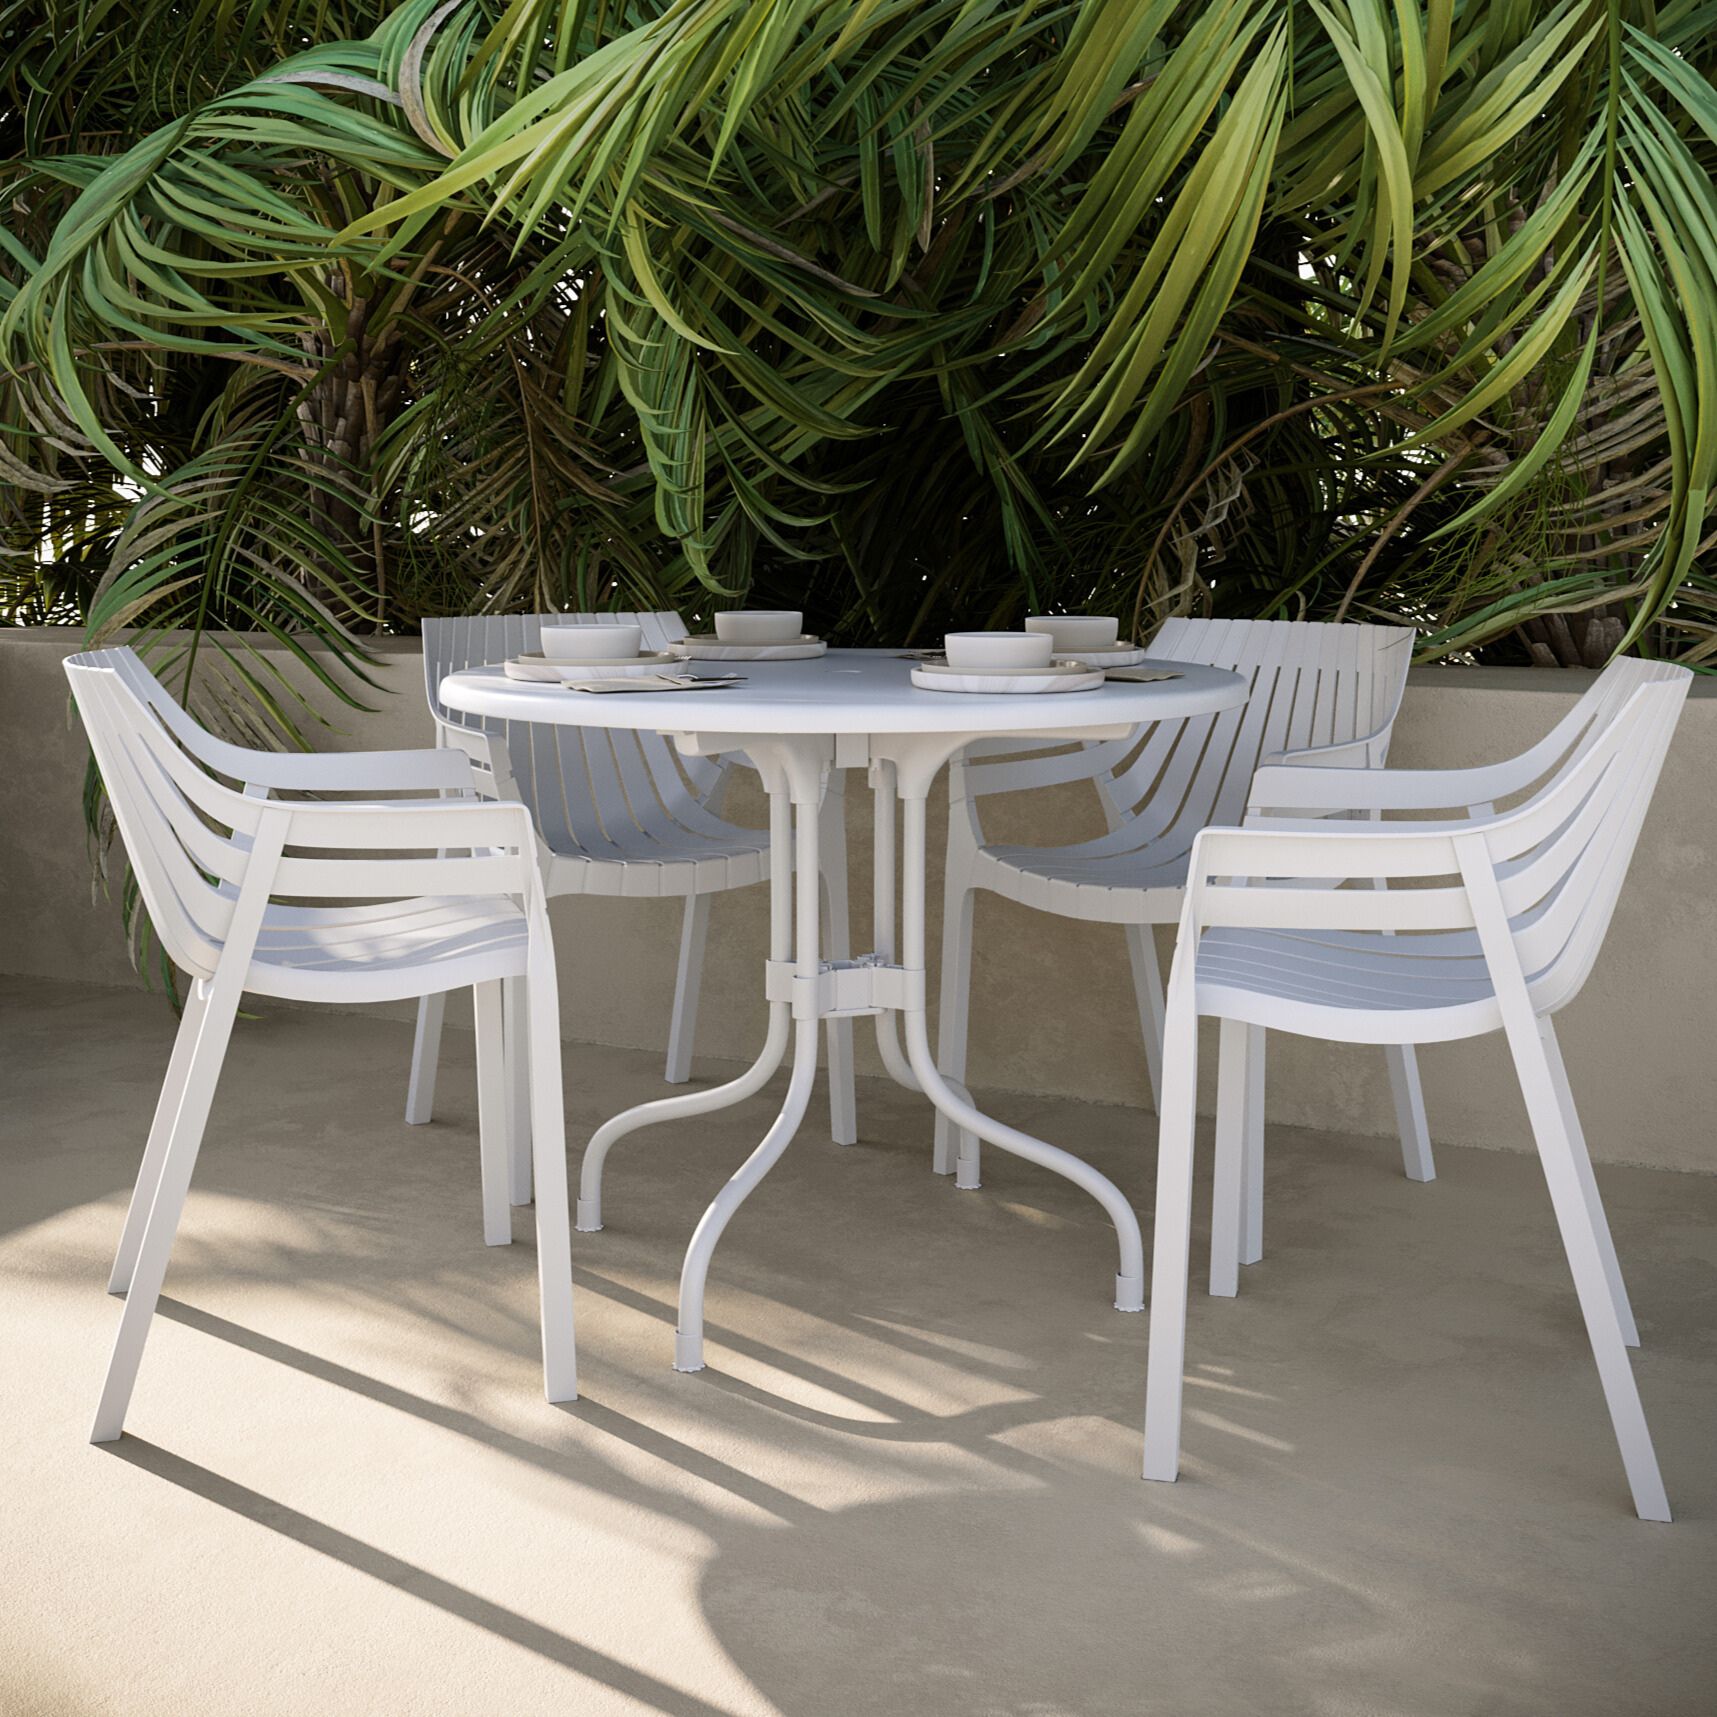 Four person outdoor round white dining table